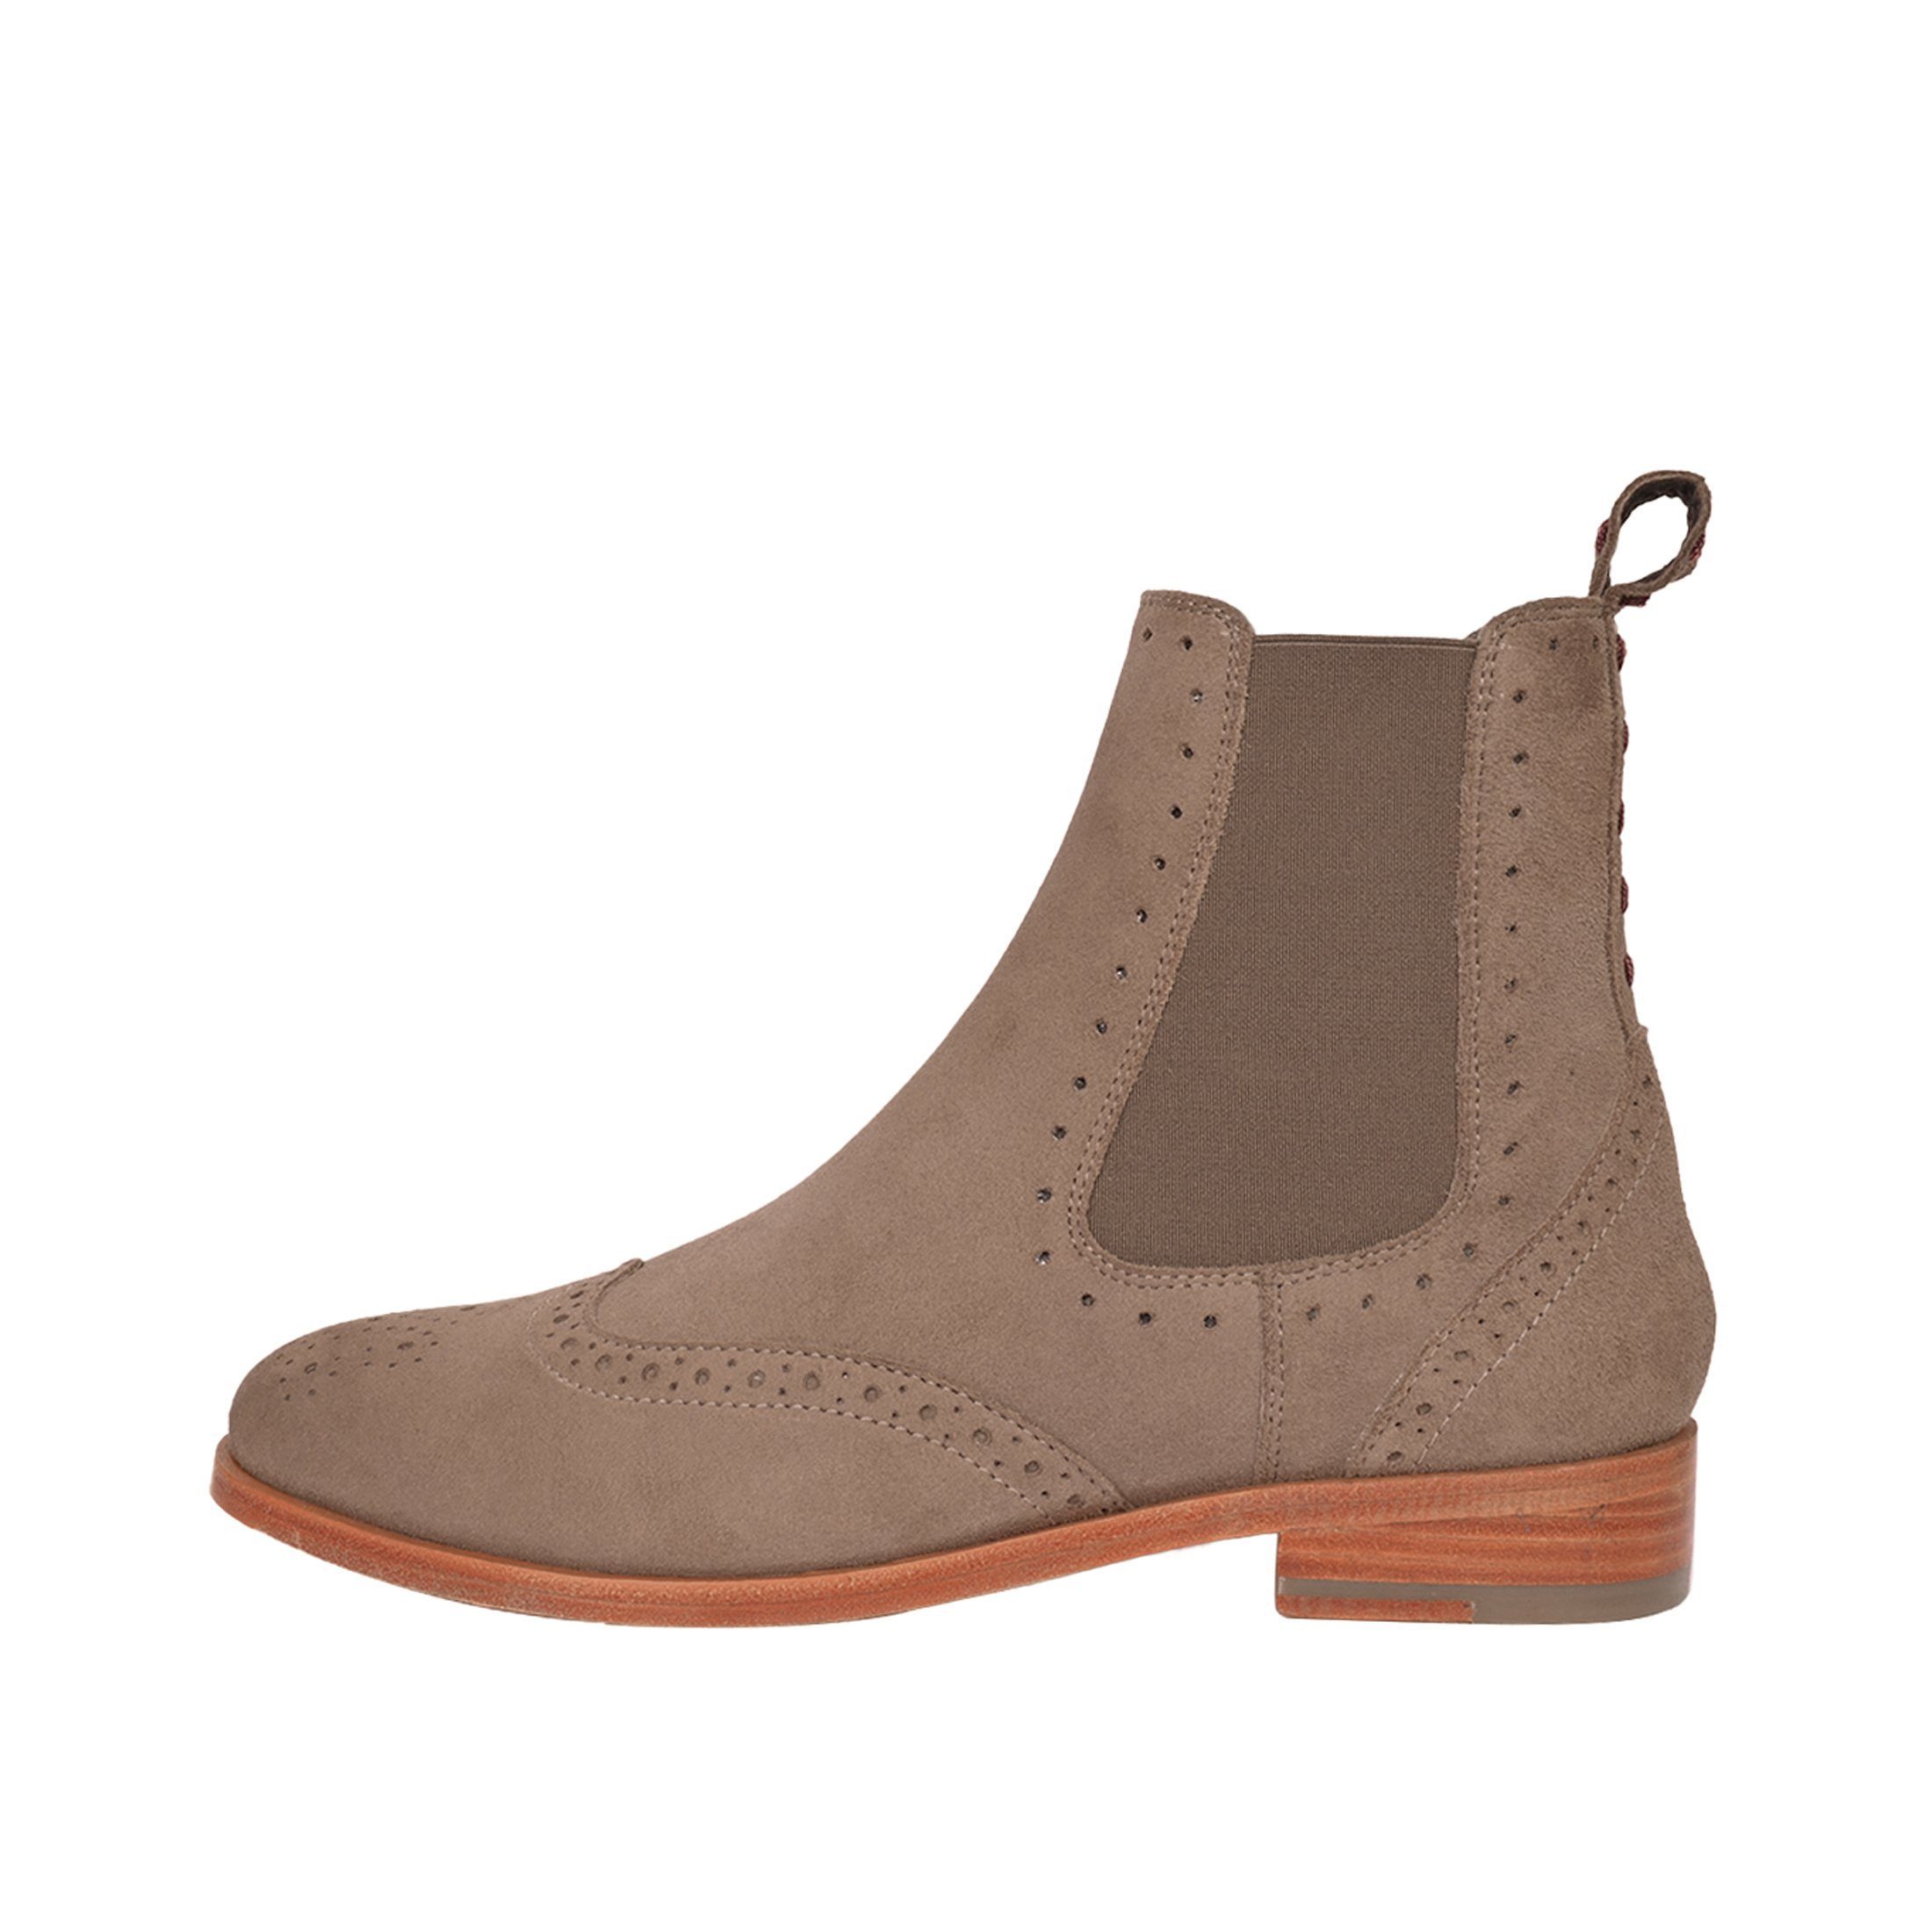 HELEN CRICKIT Chelseaboots Taupe